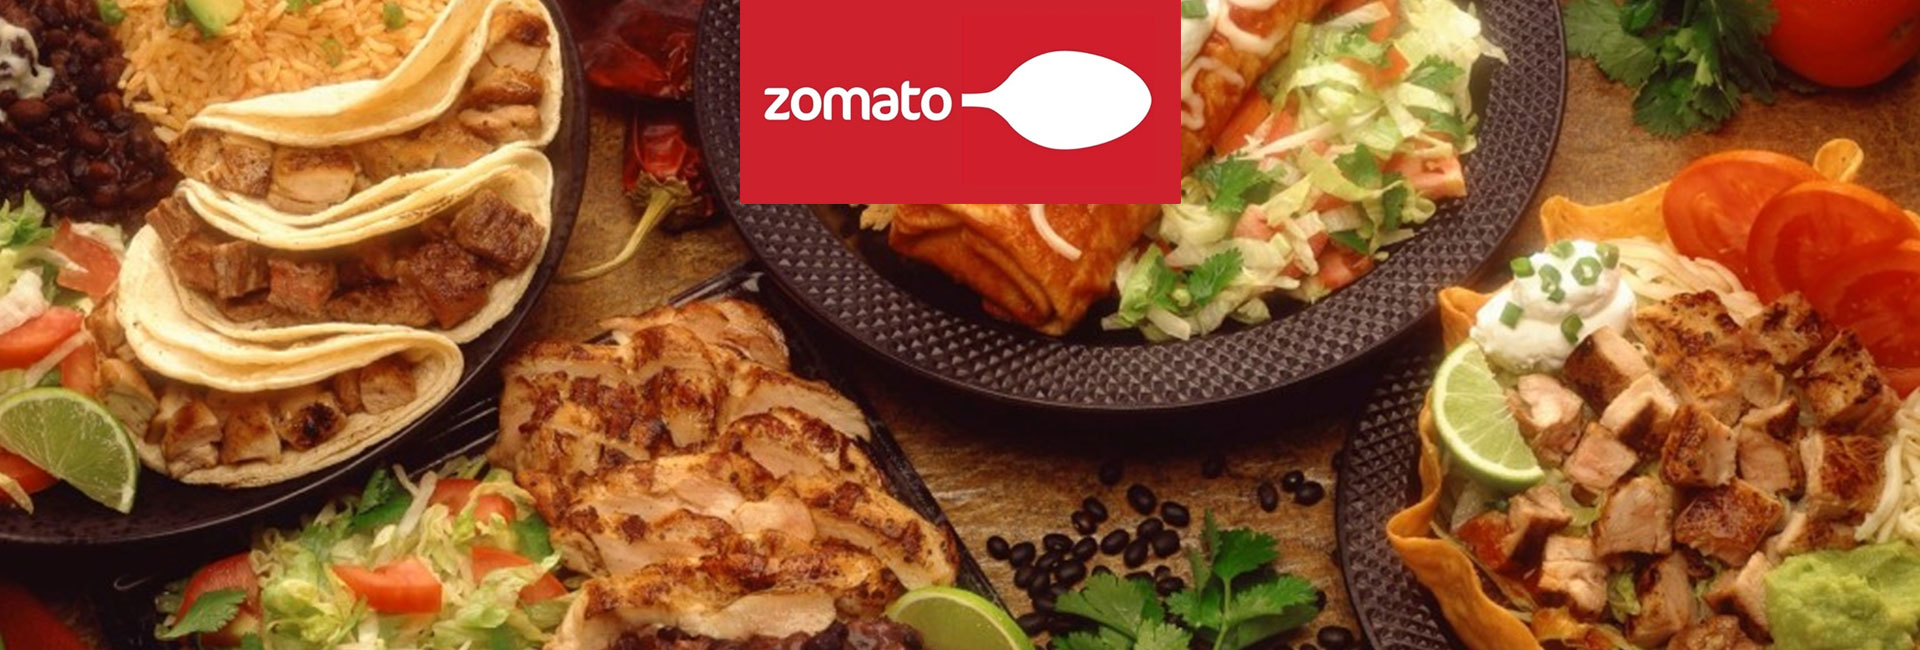 How Zomato Works: Online Food Deliver App Business Model Explained